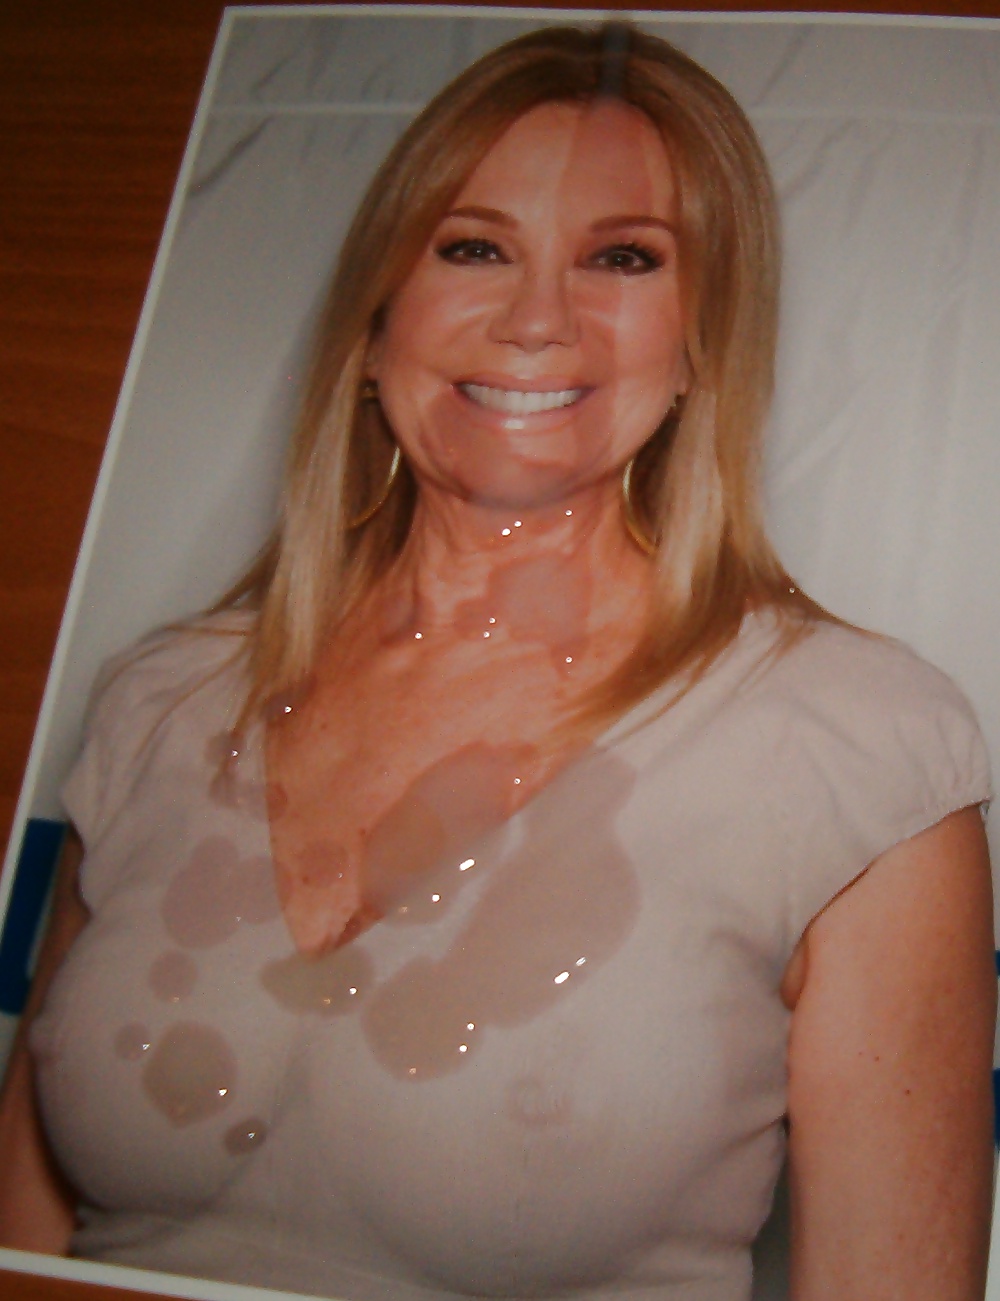 Kathie Lee A Mamelons Totalement Sucer, Hein? #24820133